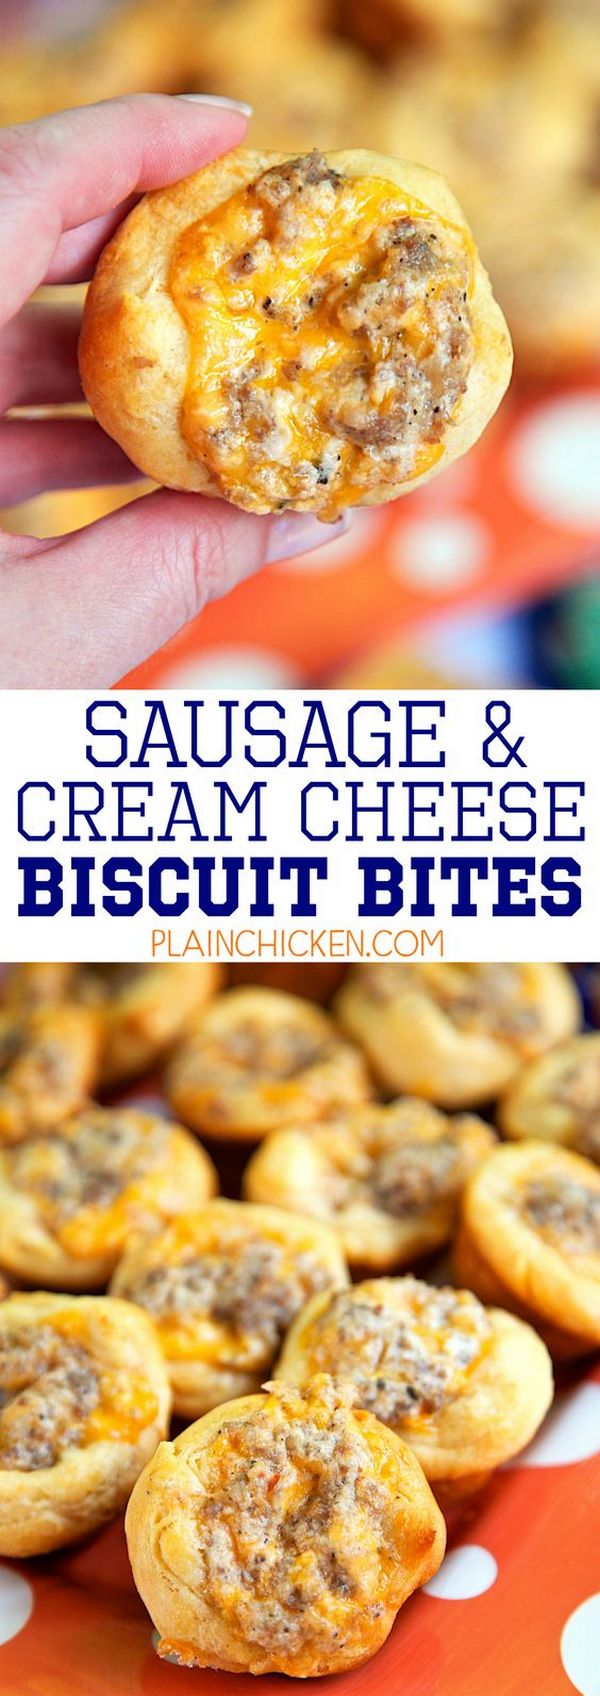 Sausage And Cream Cheese Biscuit Bites